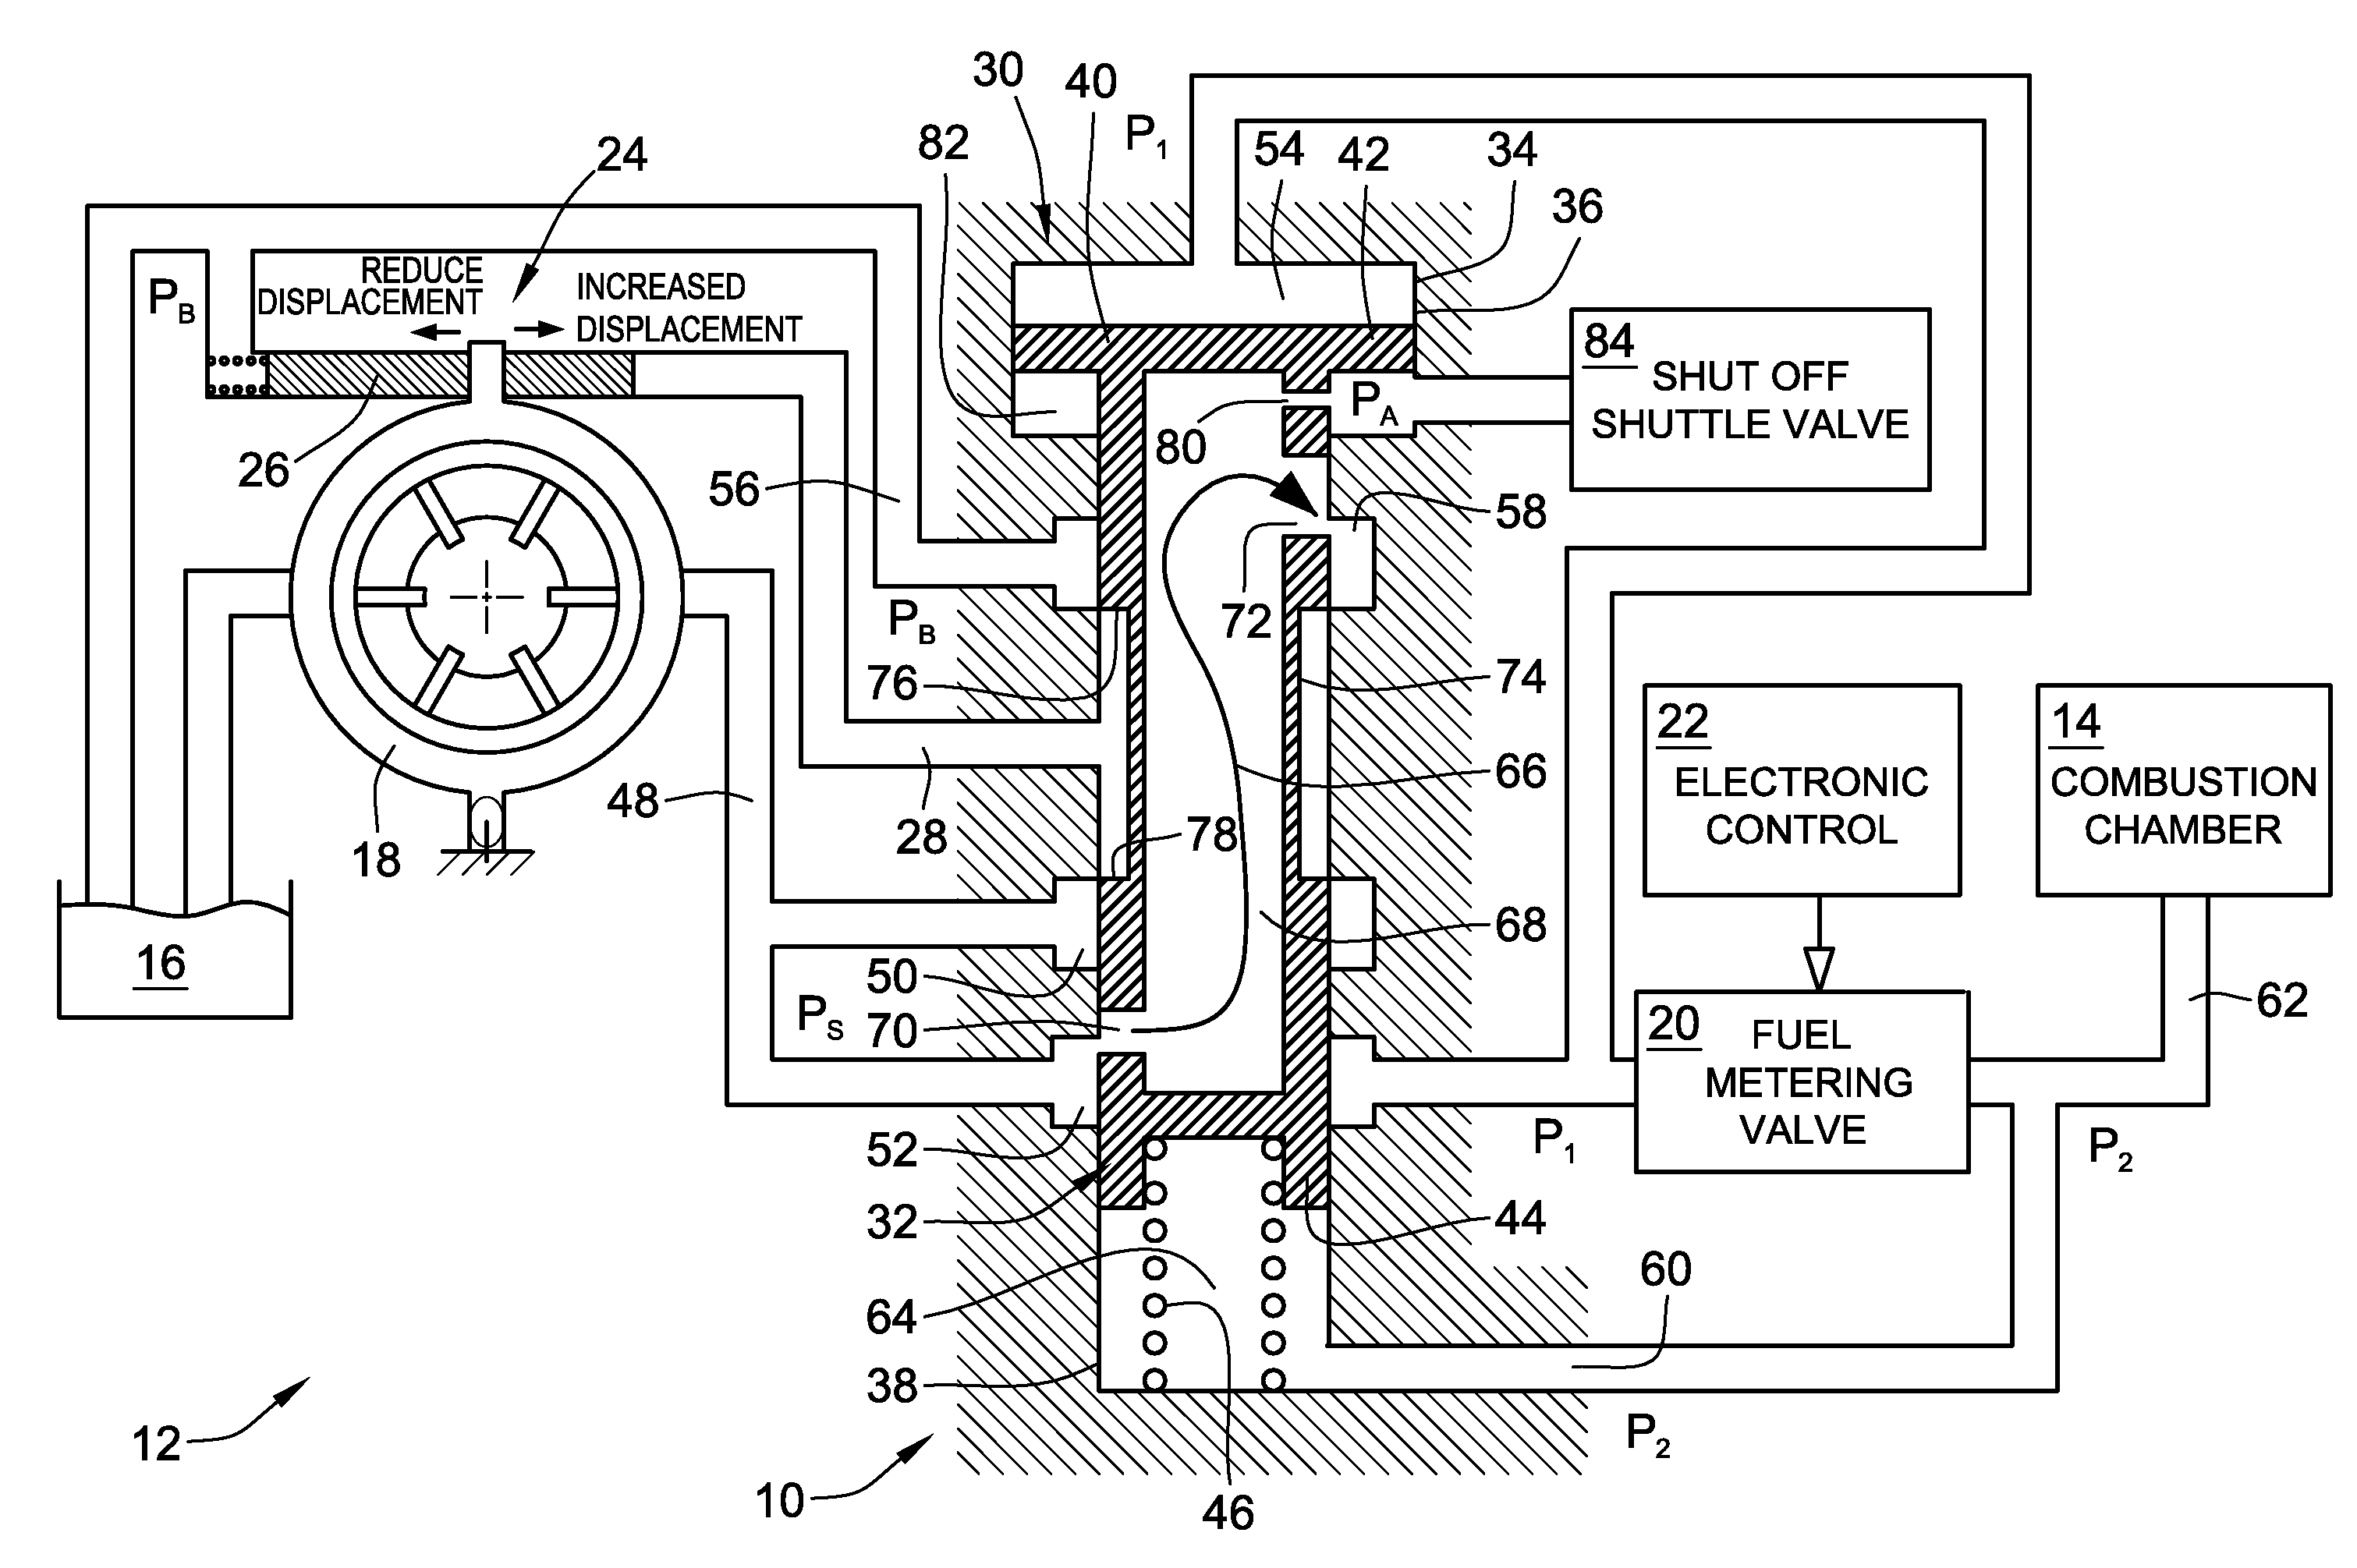 Flow compensated proportional bypass valve combined with a control valve